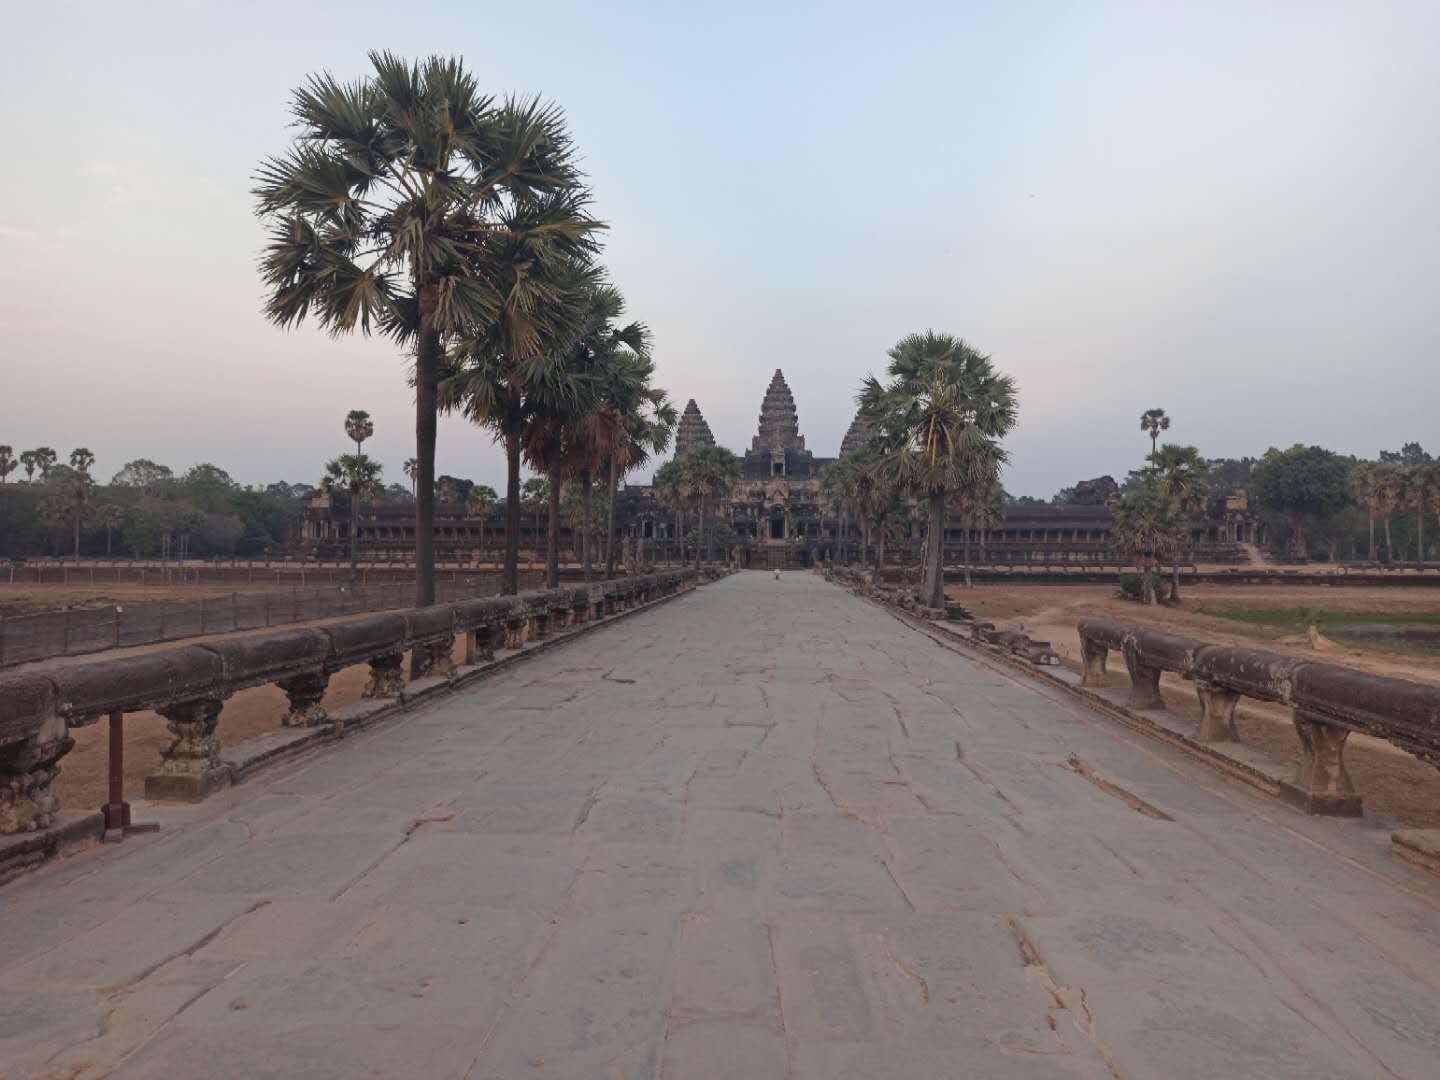 The main temple of Angkor Wat in Siem Reap, Cambodia is normally packed with people